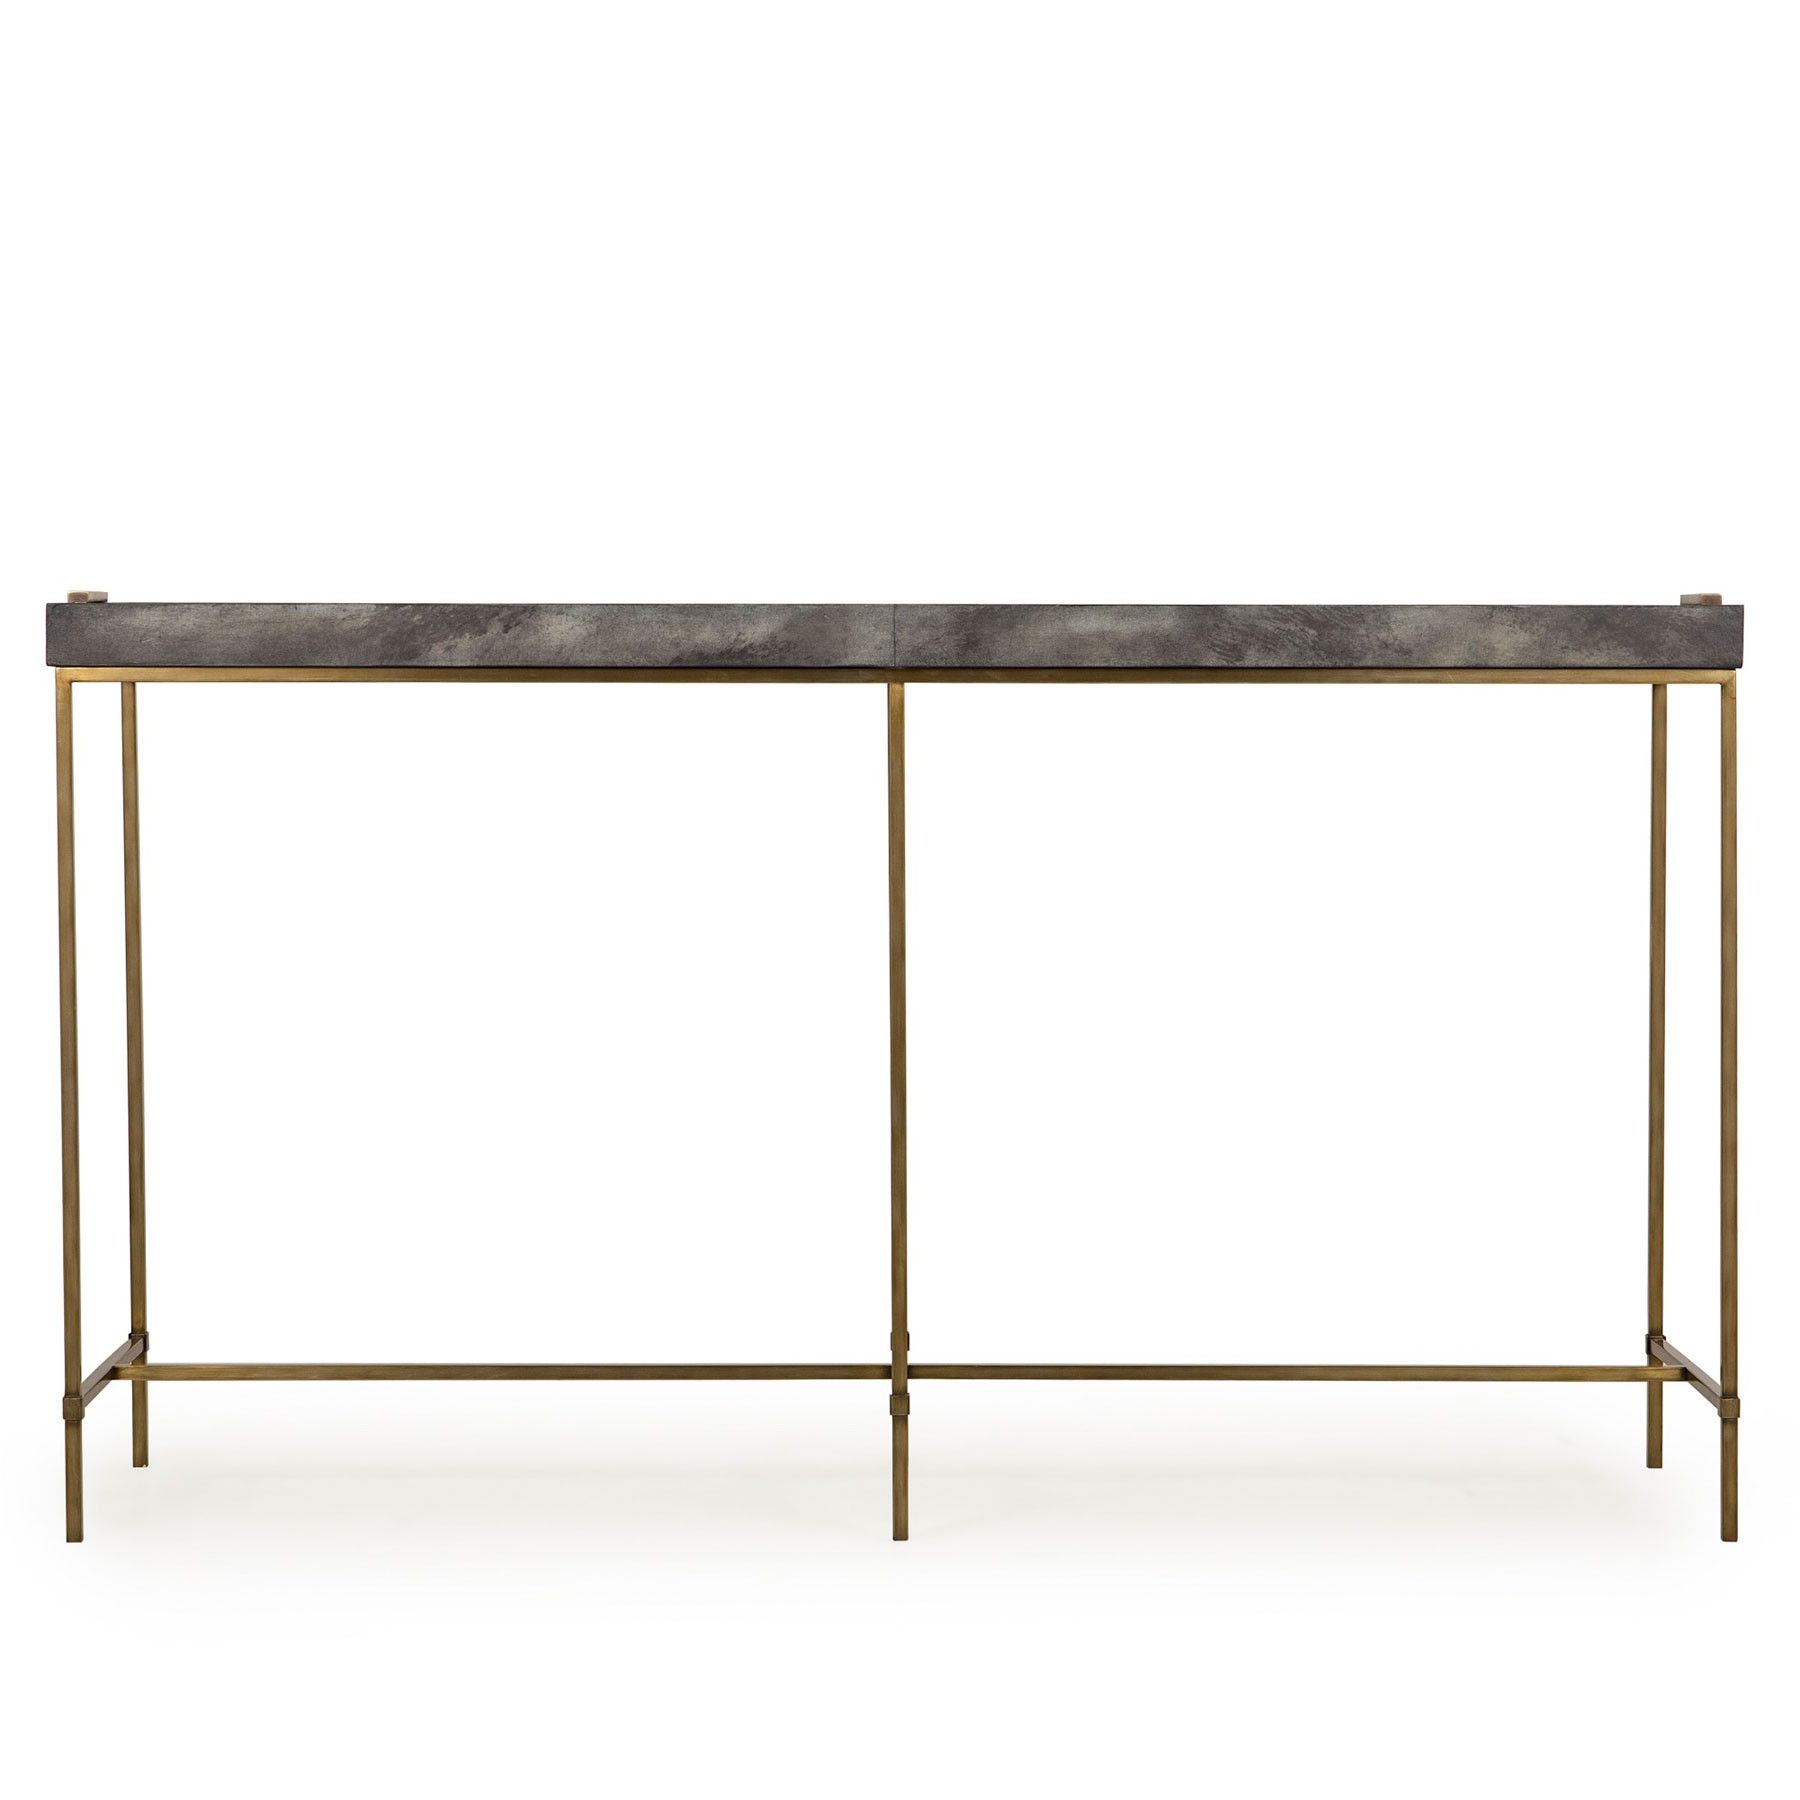 Levi Tray Console Table – Grey Shagreen | Resource Decor 0801086 Within Grey Shagreen Media Console Tables (View 12 of 20)